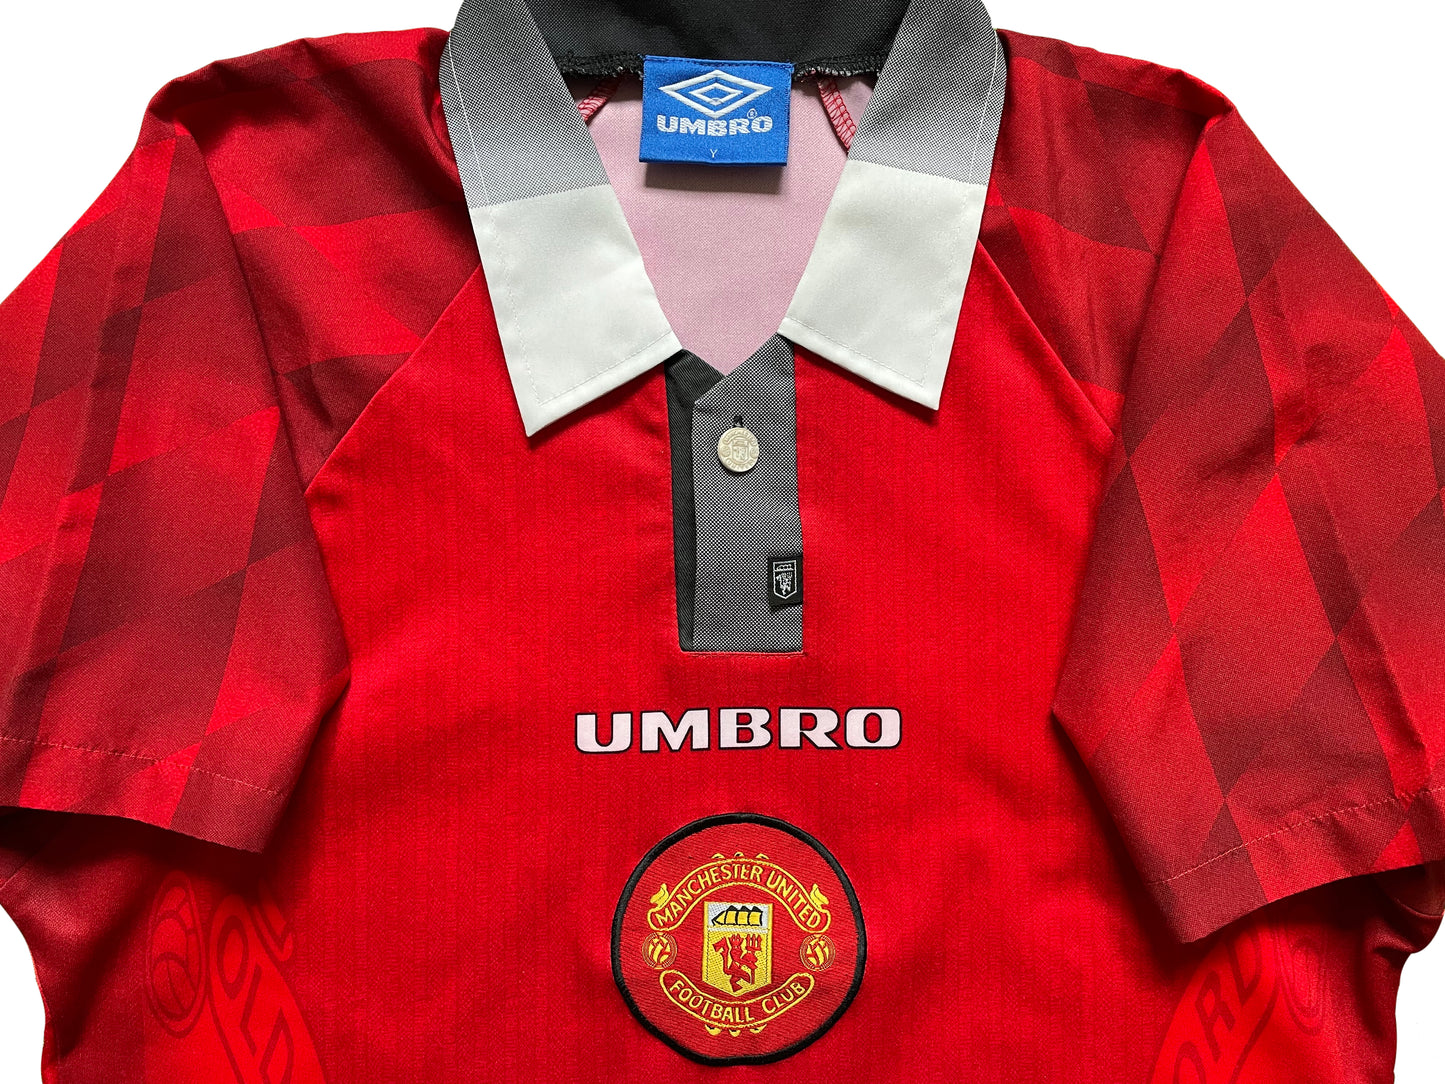 1996-1997 Manchester United FC home shirt (Y/S)